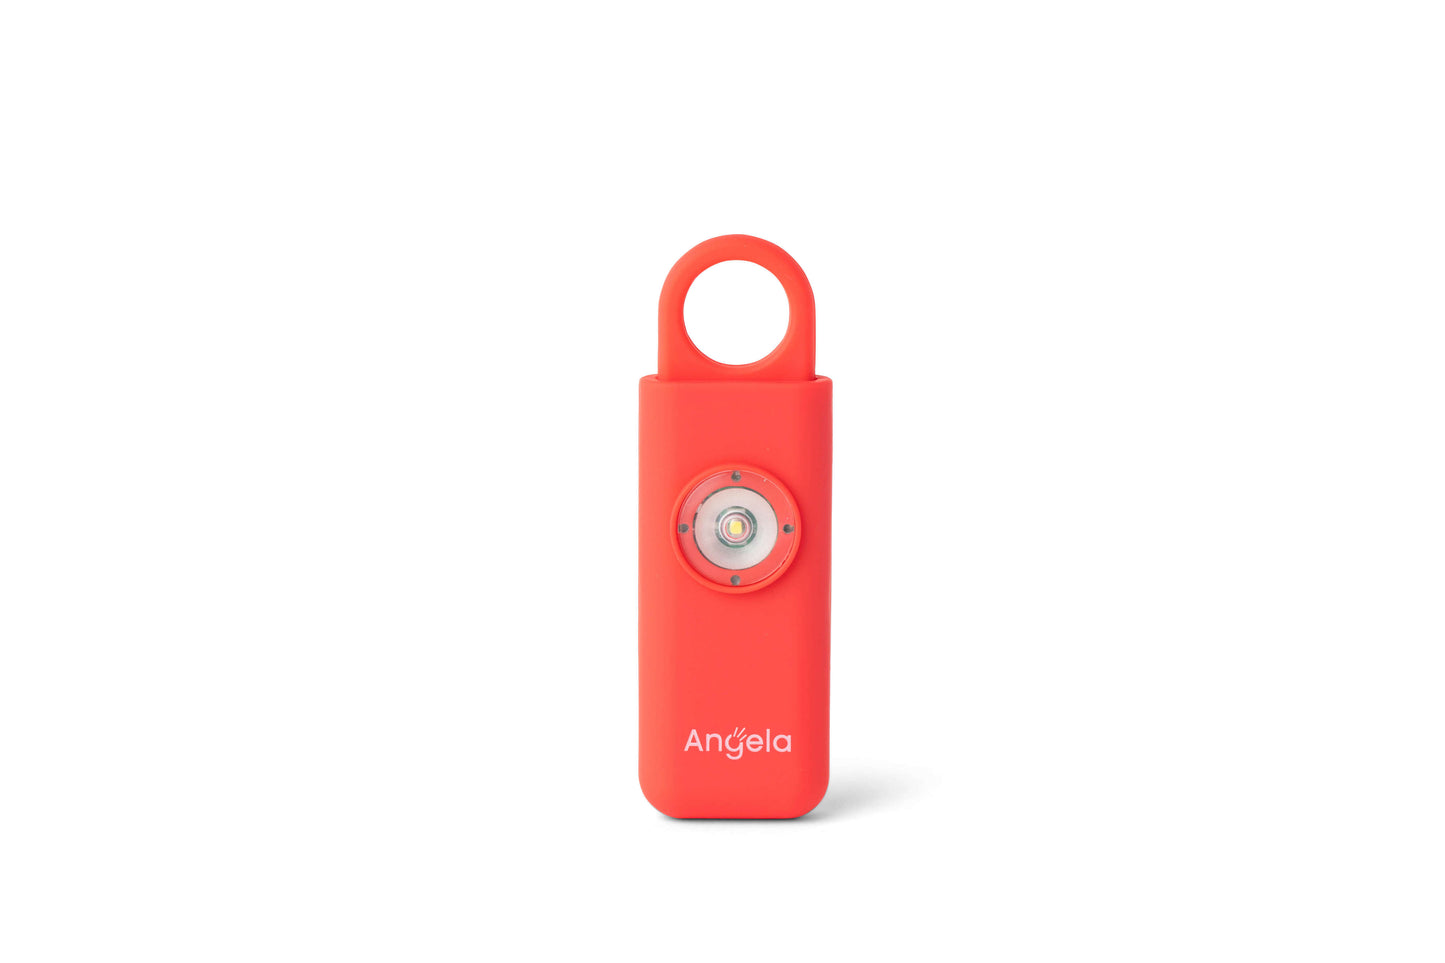 Angela's Personal Safety Alarm (Coral)